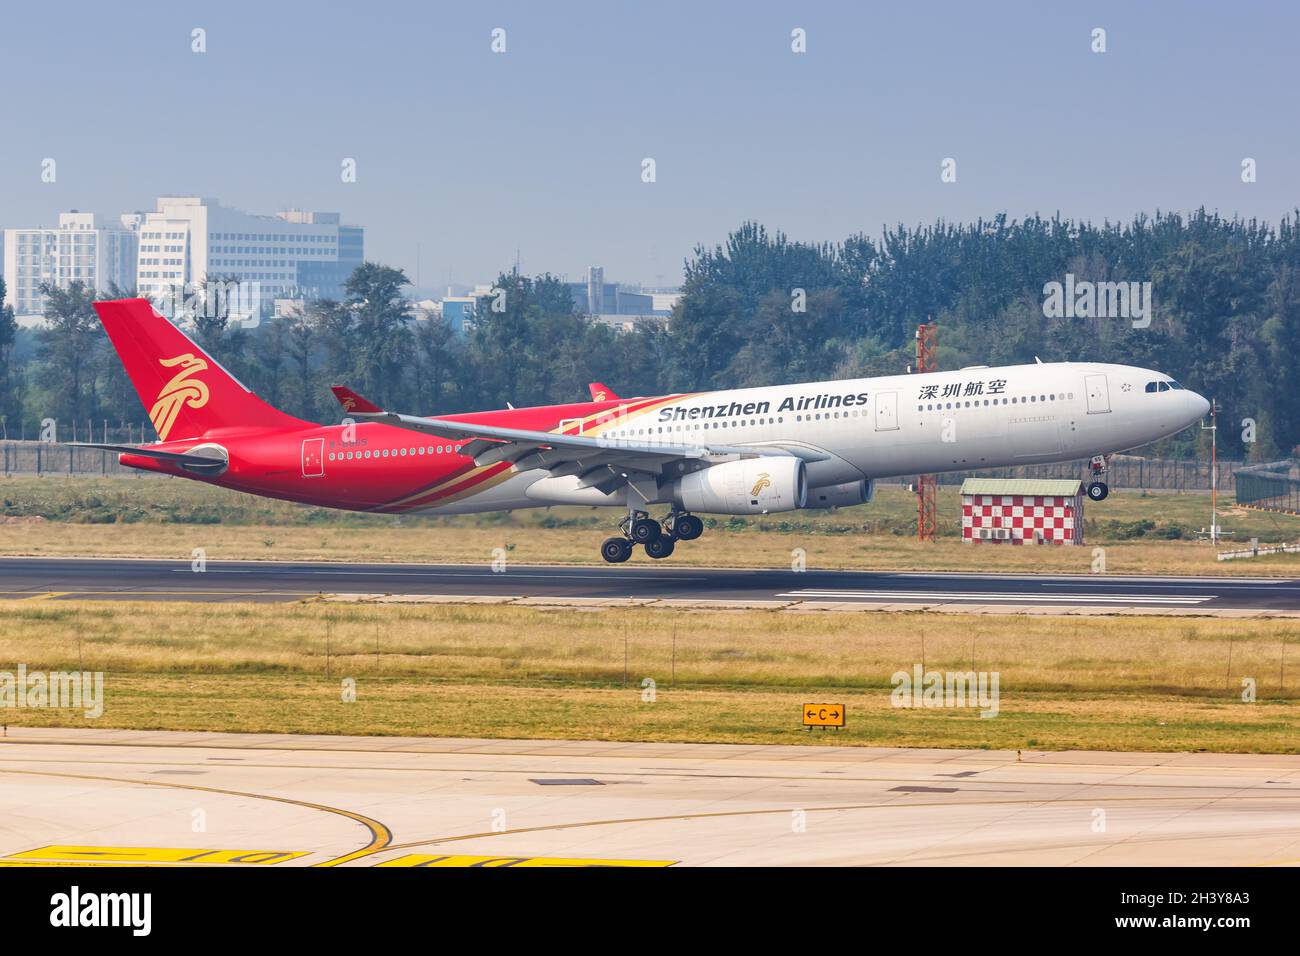 Shenzhen Airlines Airbus A330-300 aircraft Beijing airport in China Stock Photo